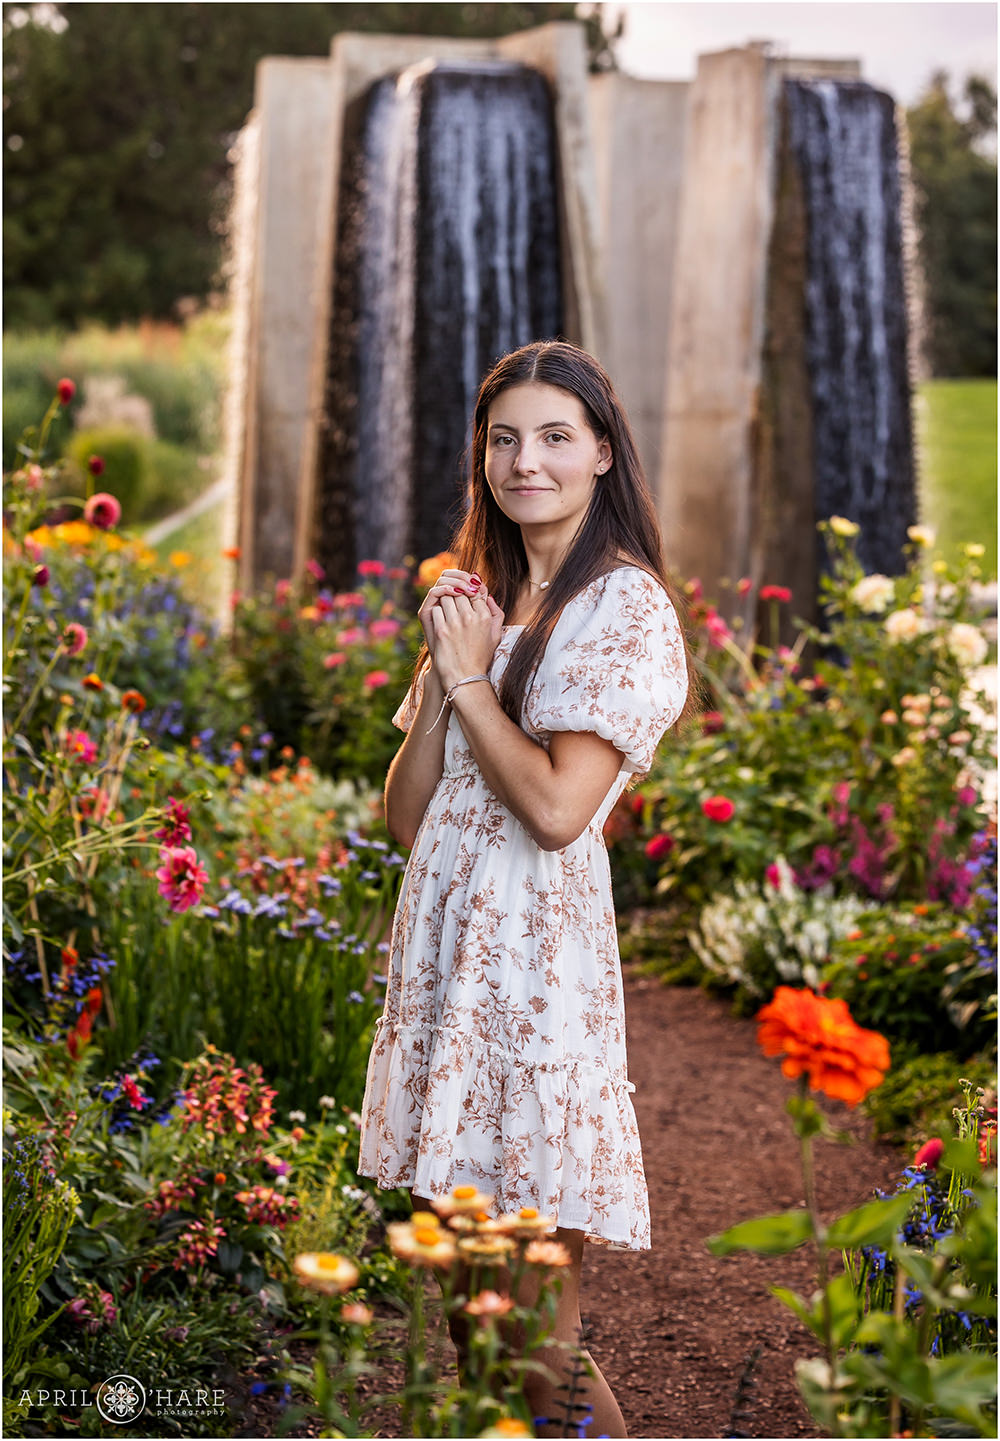 Pretty Colorful Garden Senior Portraits with large waterfall sculpture backdrop at Denver Botanic Gardens